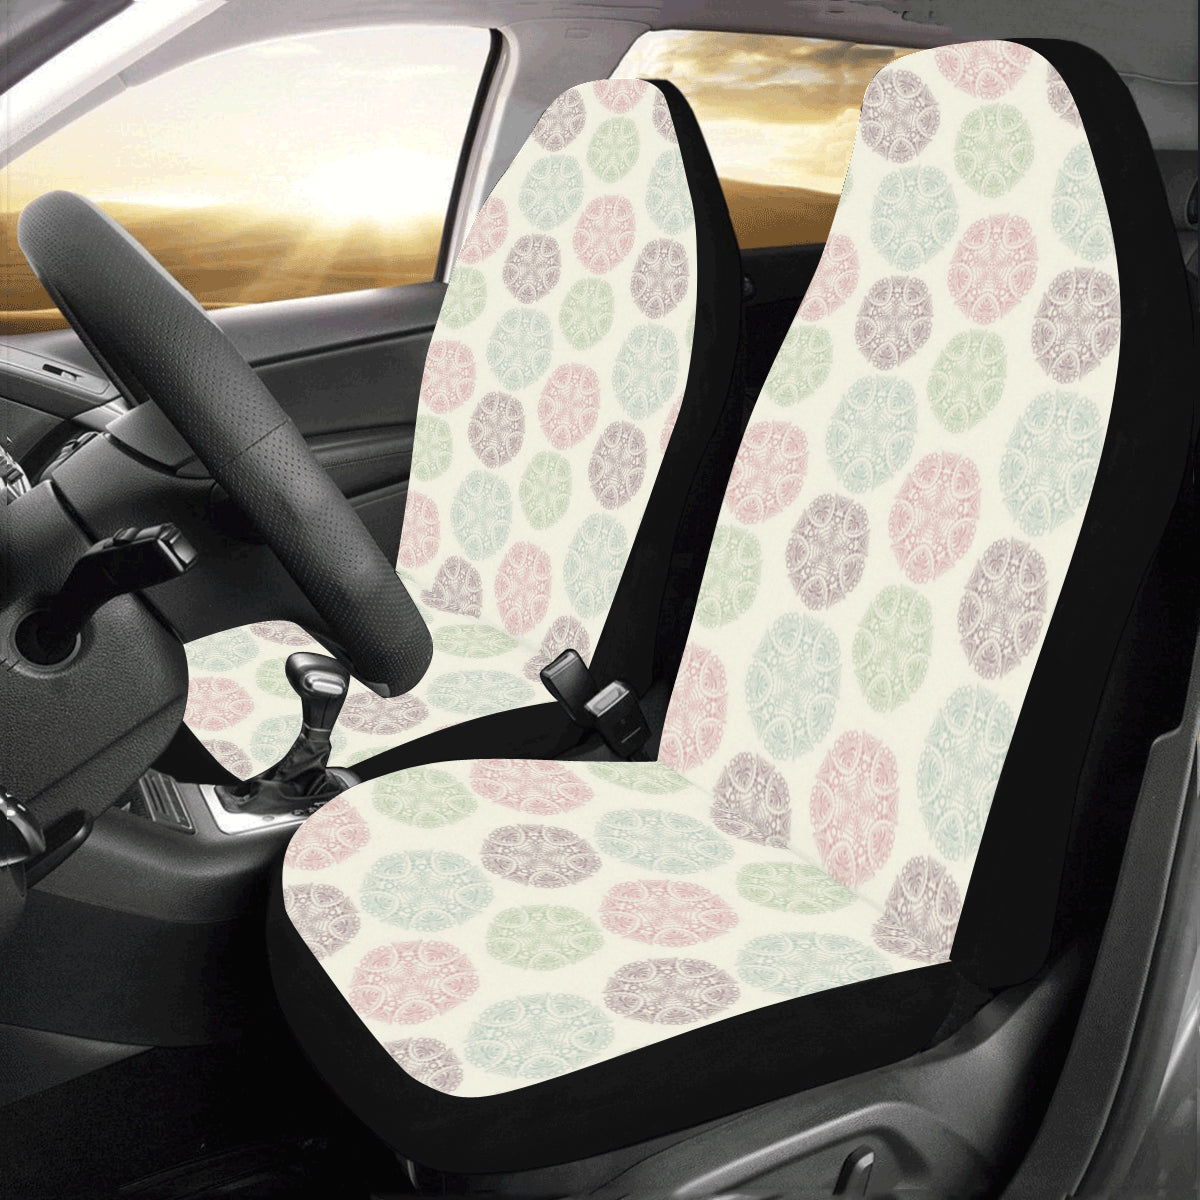 Mandala Cream Car Seat Covers 2 pc Floral Pastel Spiritual Front Seat Covers for Vehicle, Boho Car SUV Truck Protector Accessory Decoration Starcove Fashion